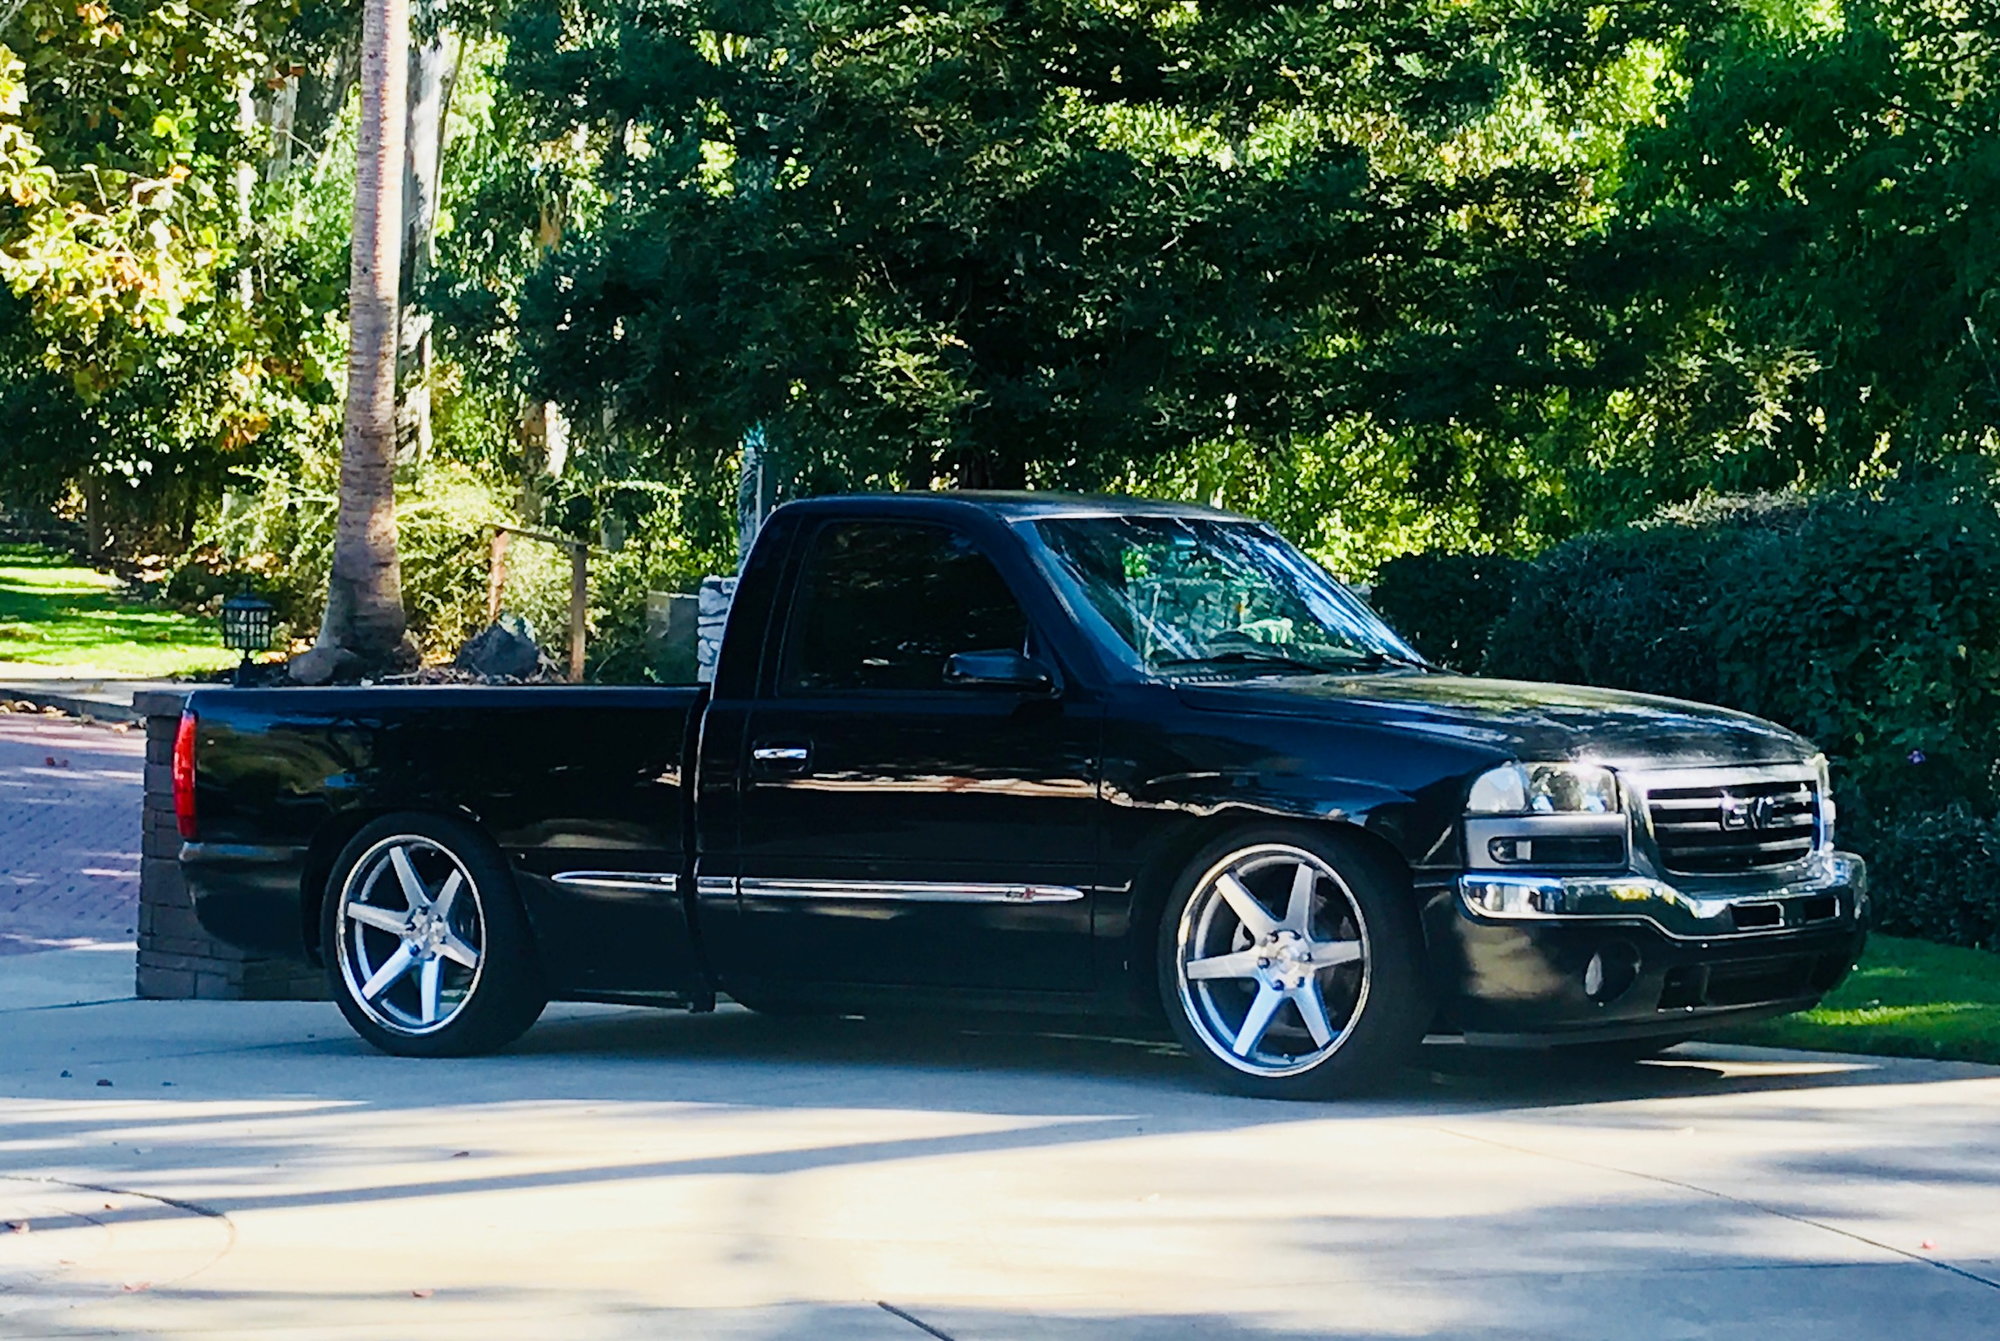 Lowered on 22s???? - Page 5 - PerformanceTrucks.net Forums